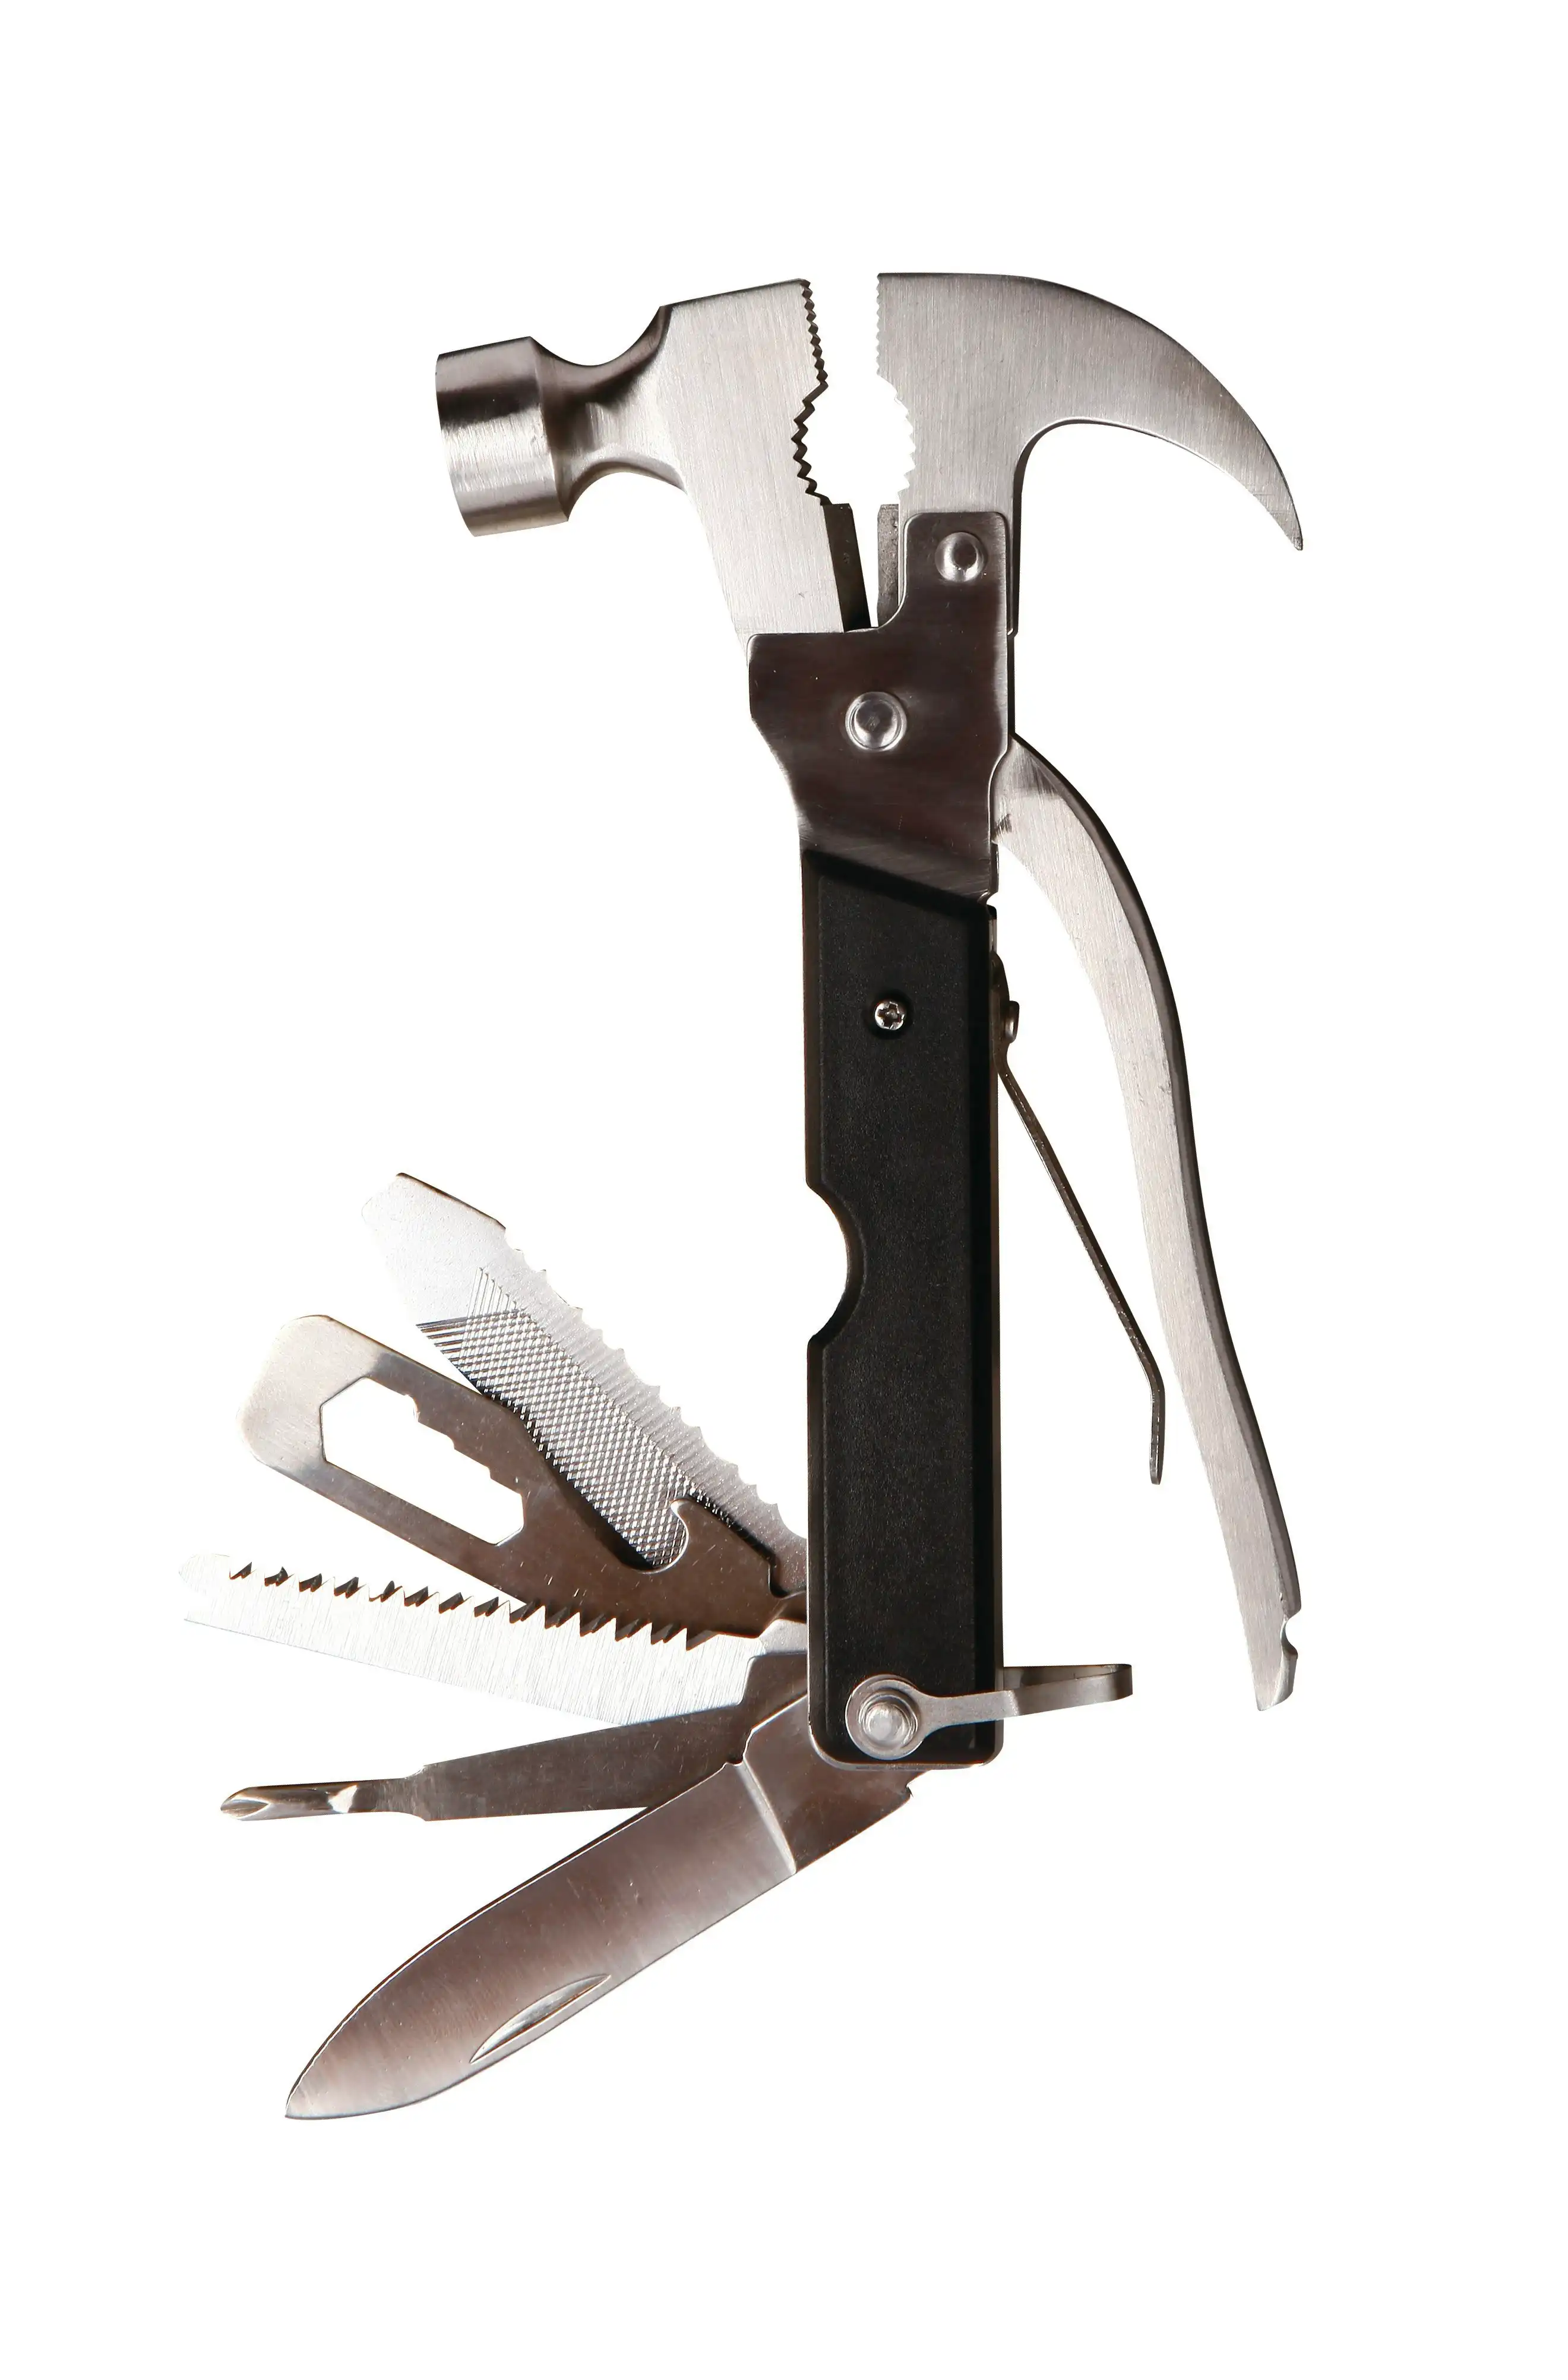 Hercules Ultimate Hammer Multi Tool - 18 Tools Combined into 1